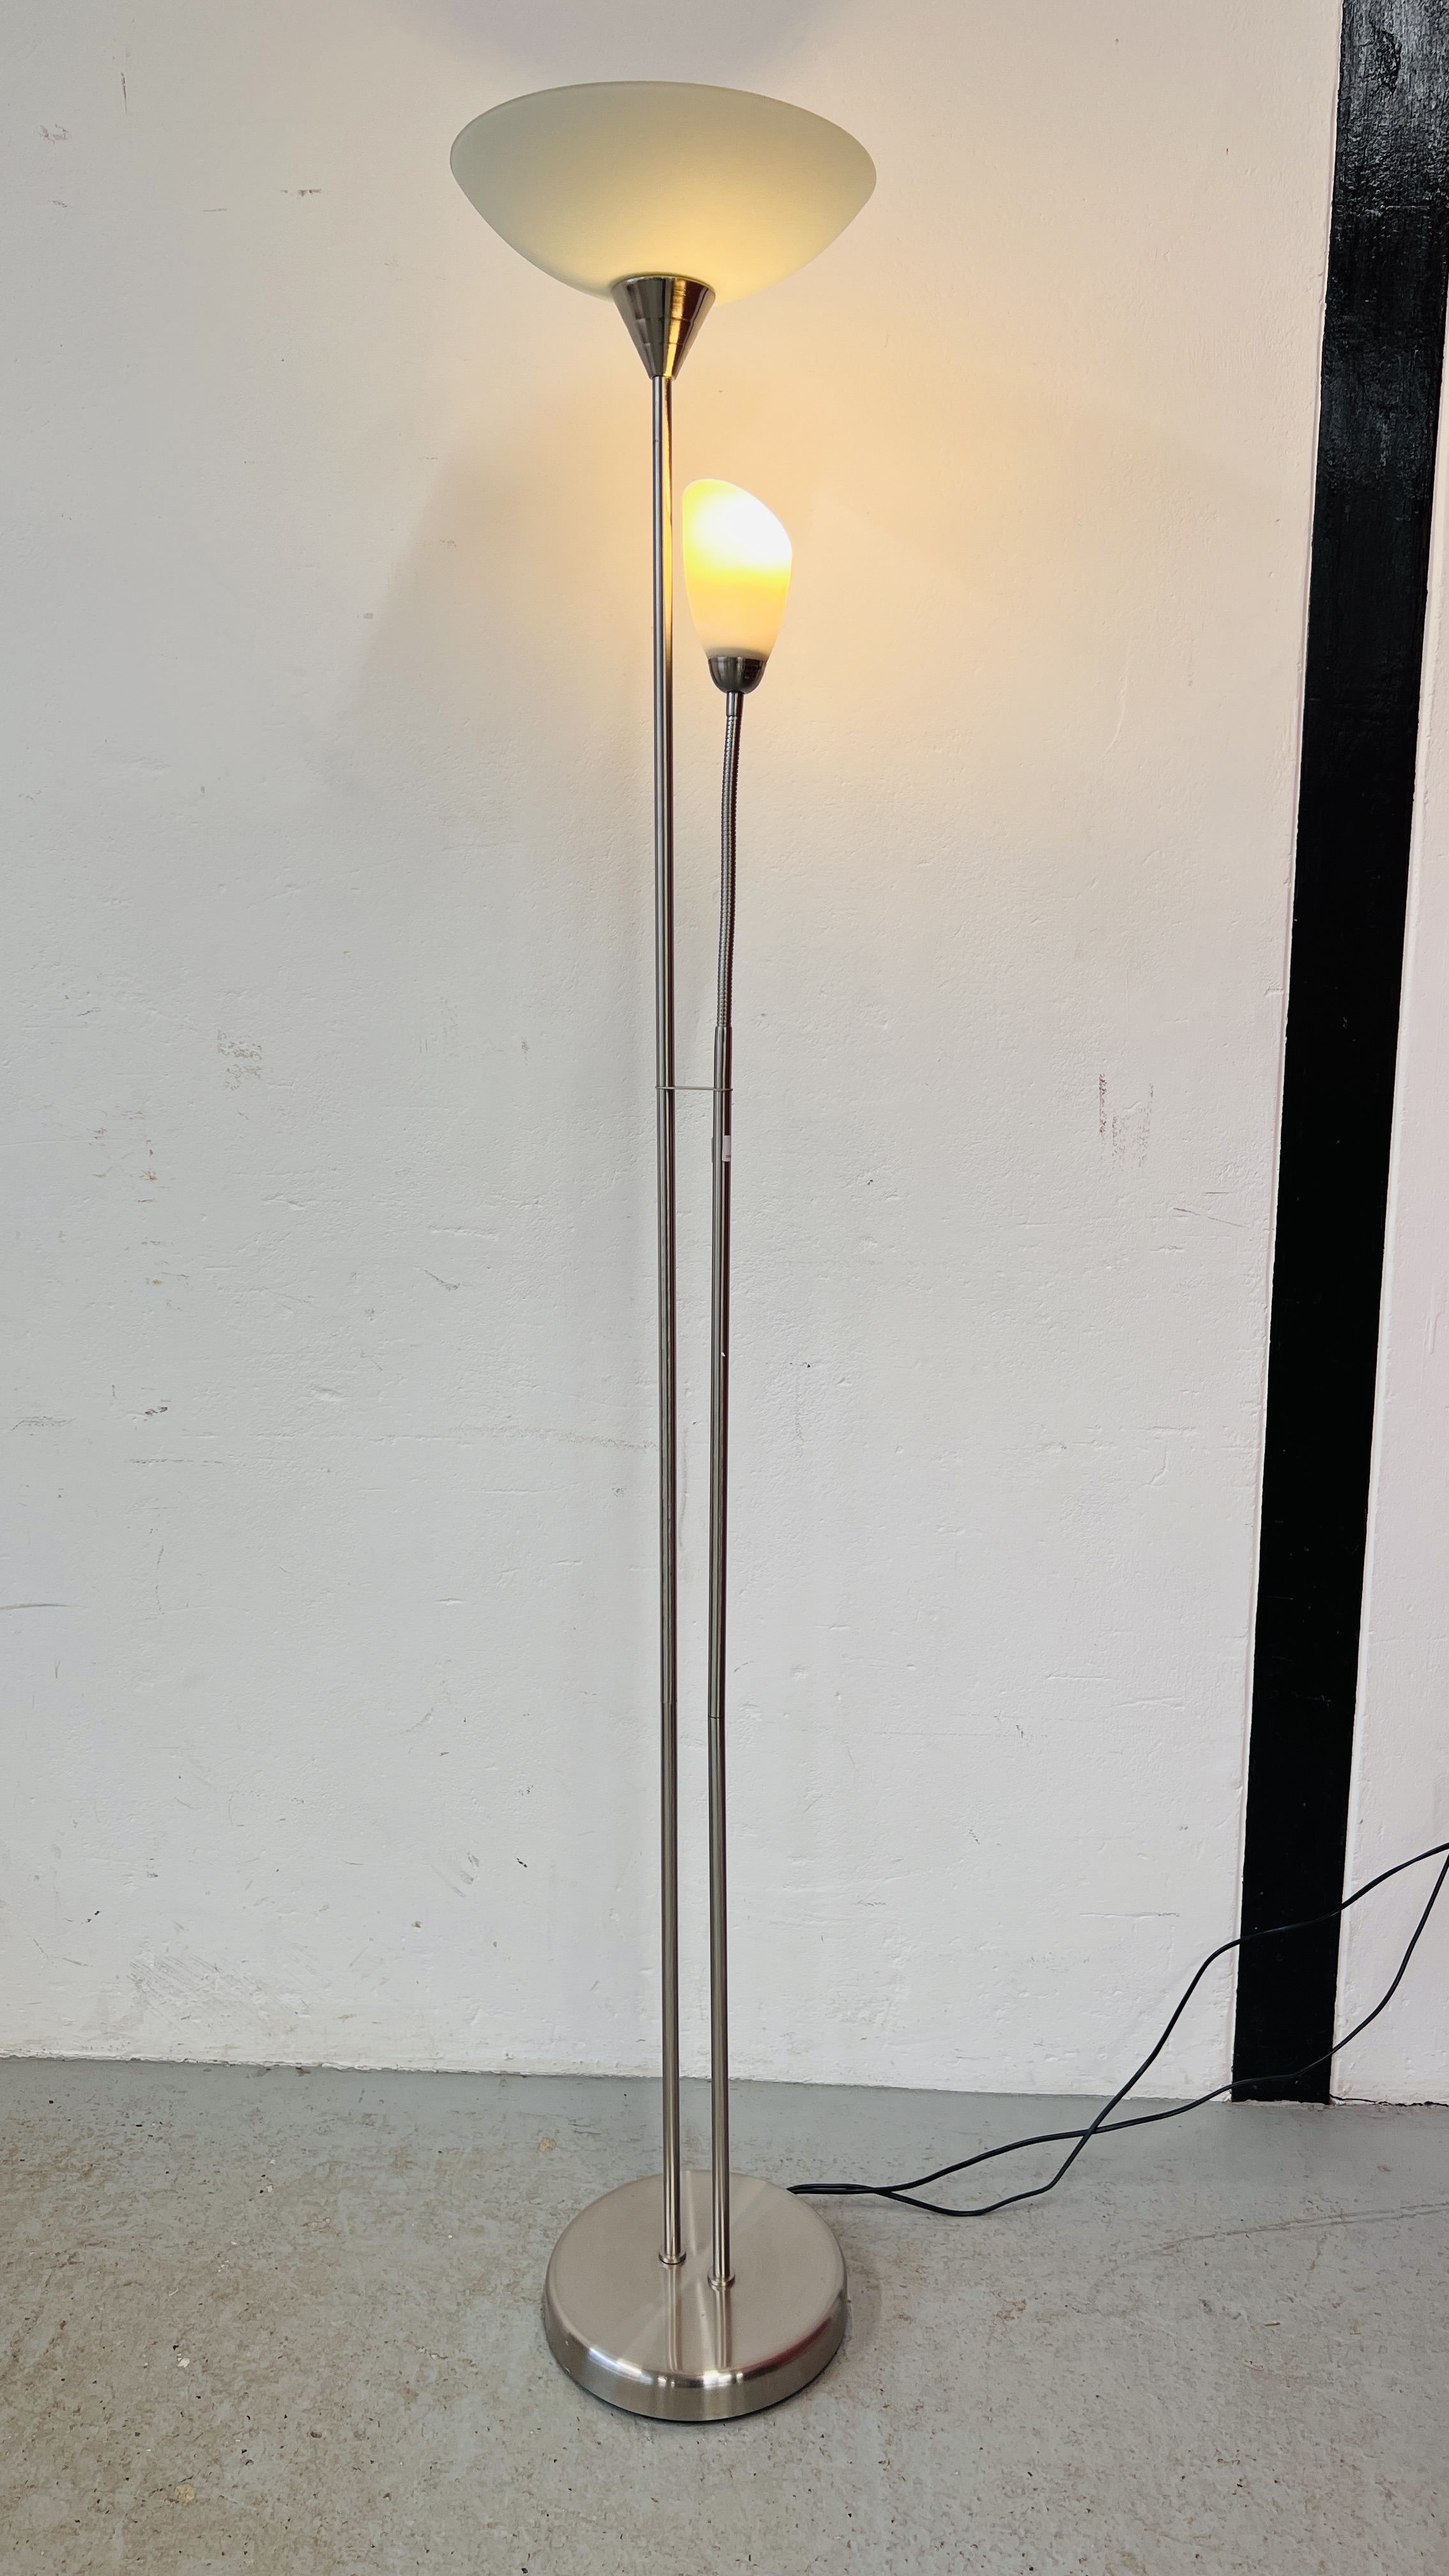 A MODERN BRUSHED STAINLESS STEEL FLOOR STANDING UPLIGHTER WITH READING LAMP - SOLD AS SEEN.